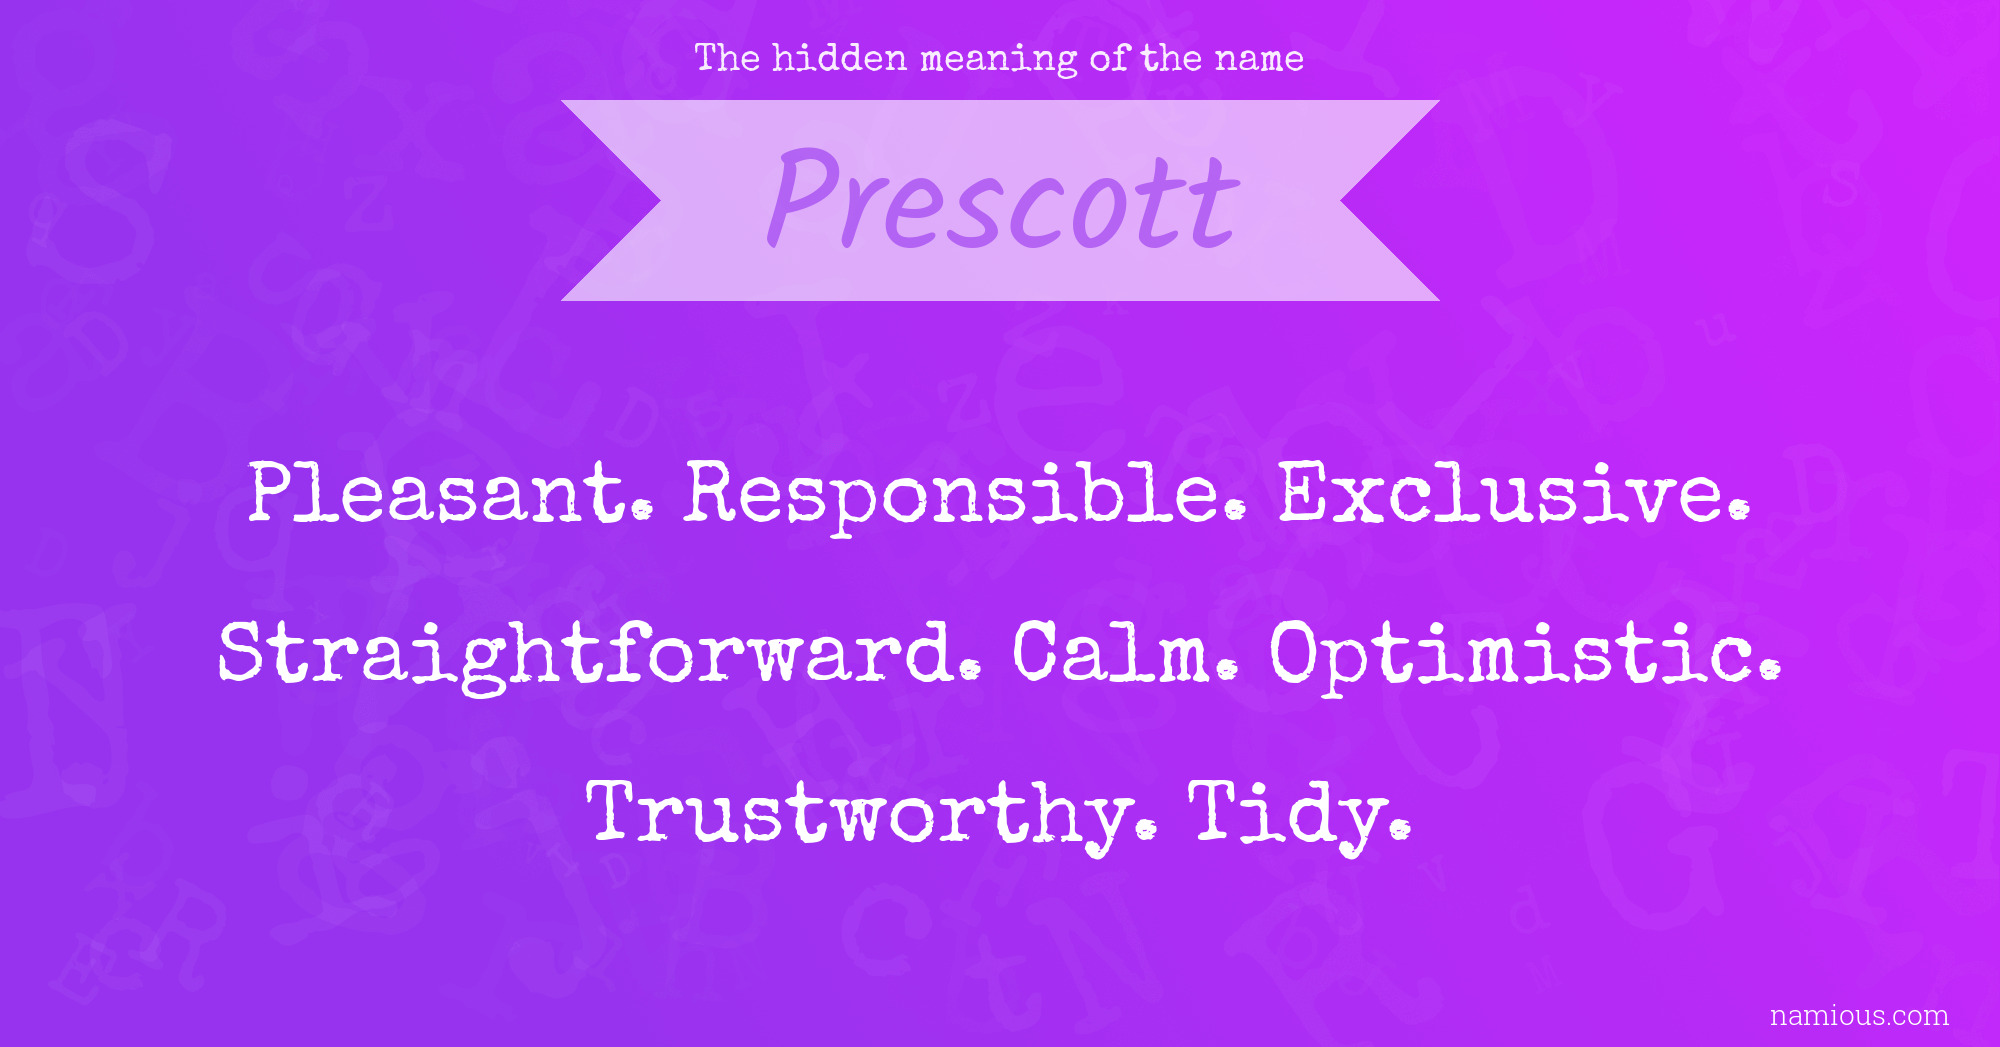 The hidden meaning of the name Prescott